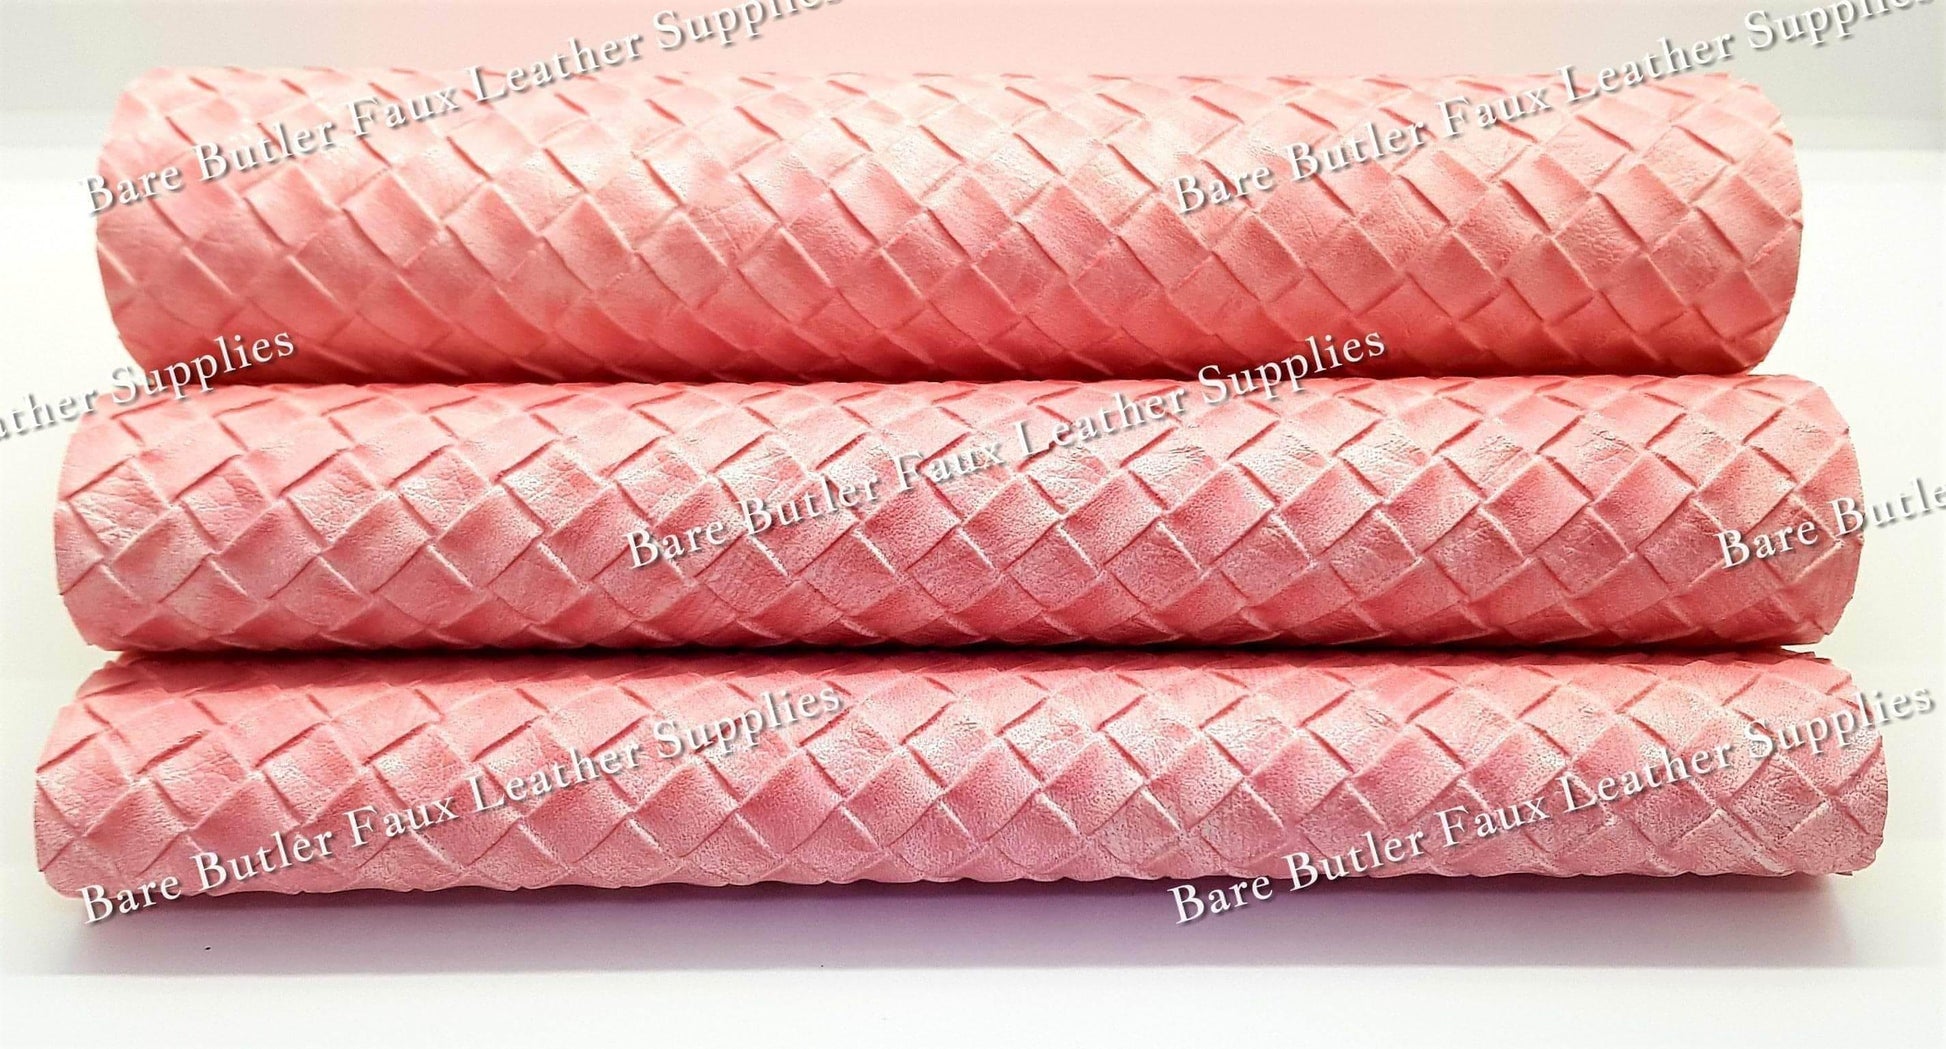 Basket weave Pink - Faux, Faux Leather, Floral, Glitter - Bare Butler Faux Leather Supplies 